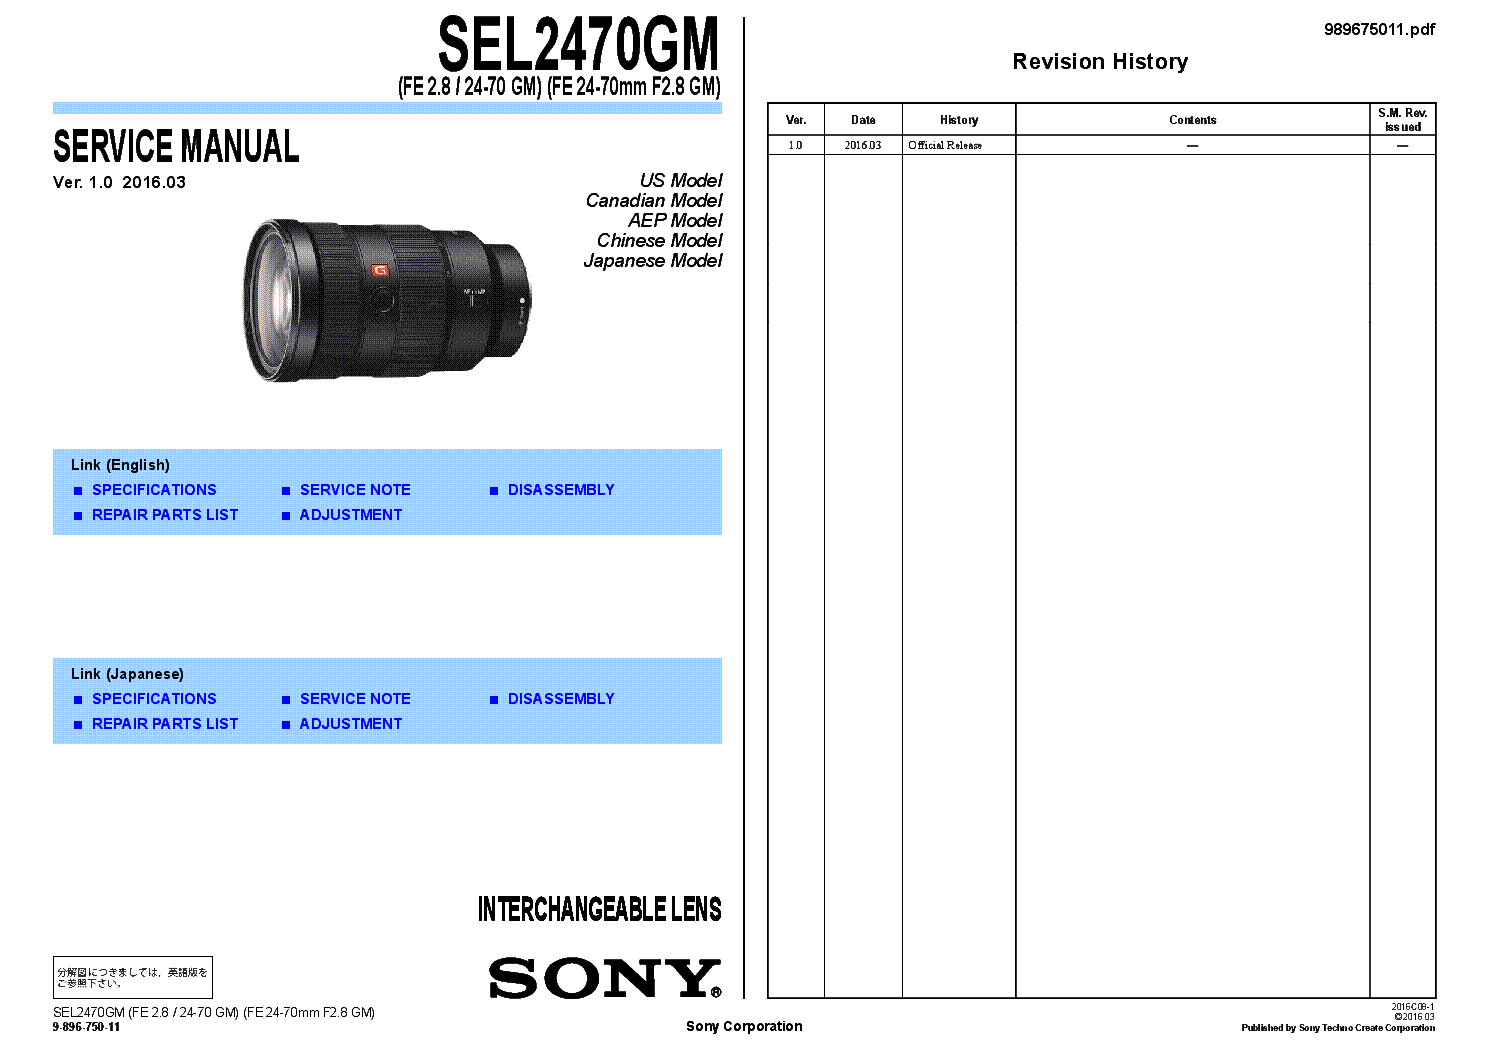 SONY SEL2470GM SM Service Manual for info schematics, download, eeprom, electronics repair experts